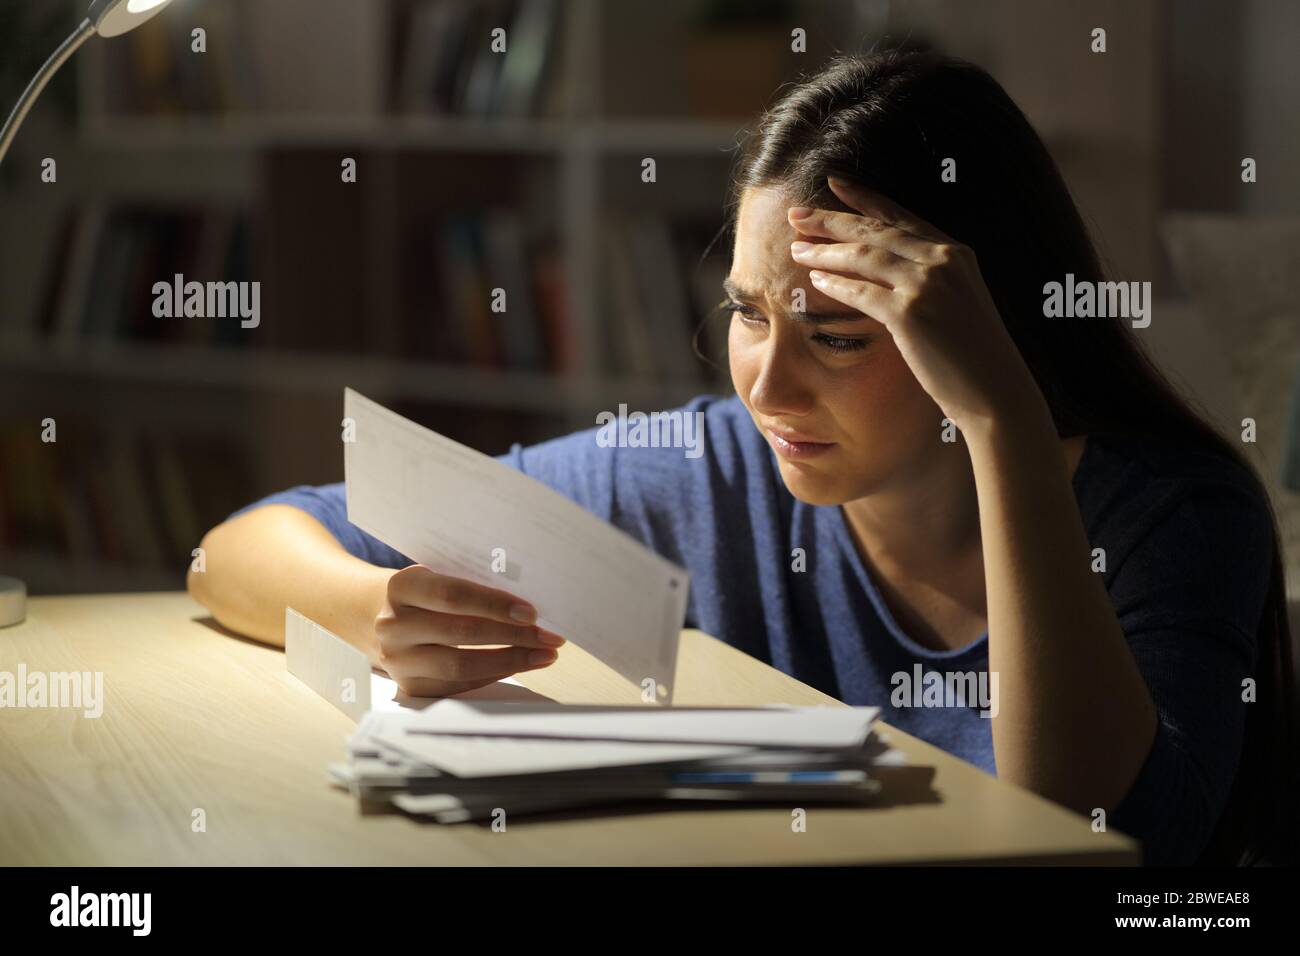 Worried woman looking at receipts at night sitting in the living room at home Stock Photo